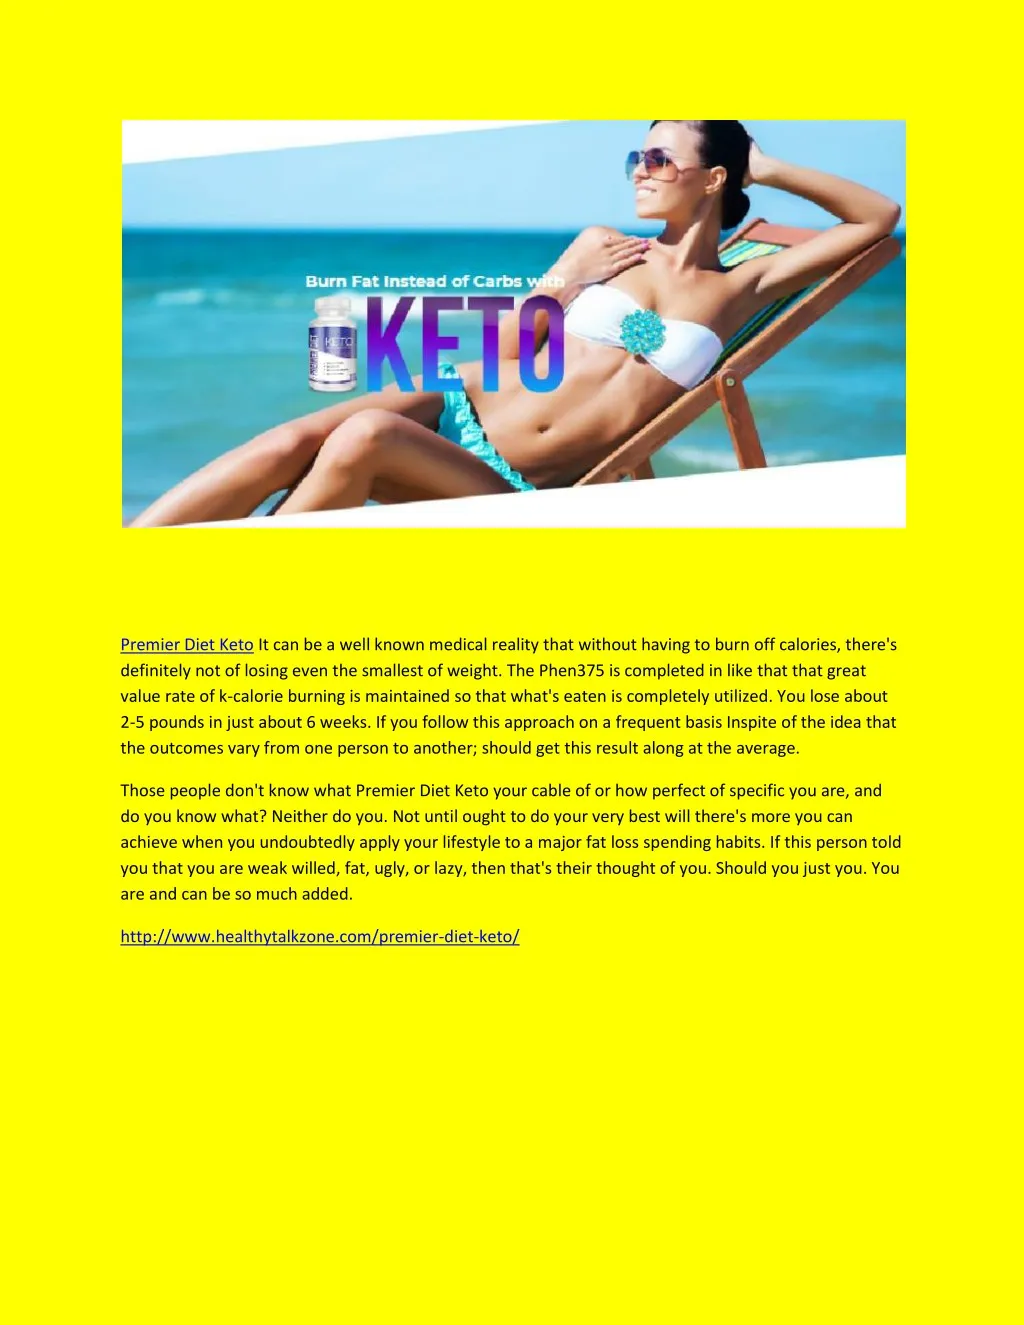 premier diet keto it can be a well known medical